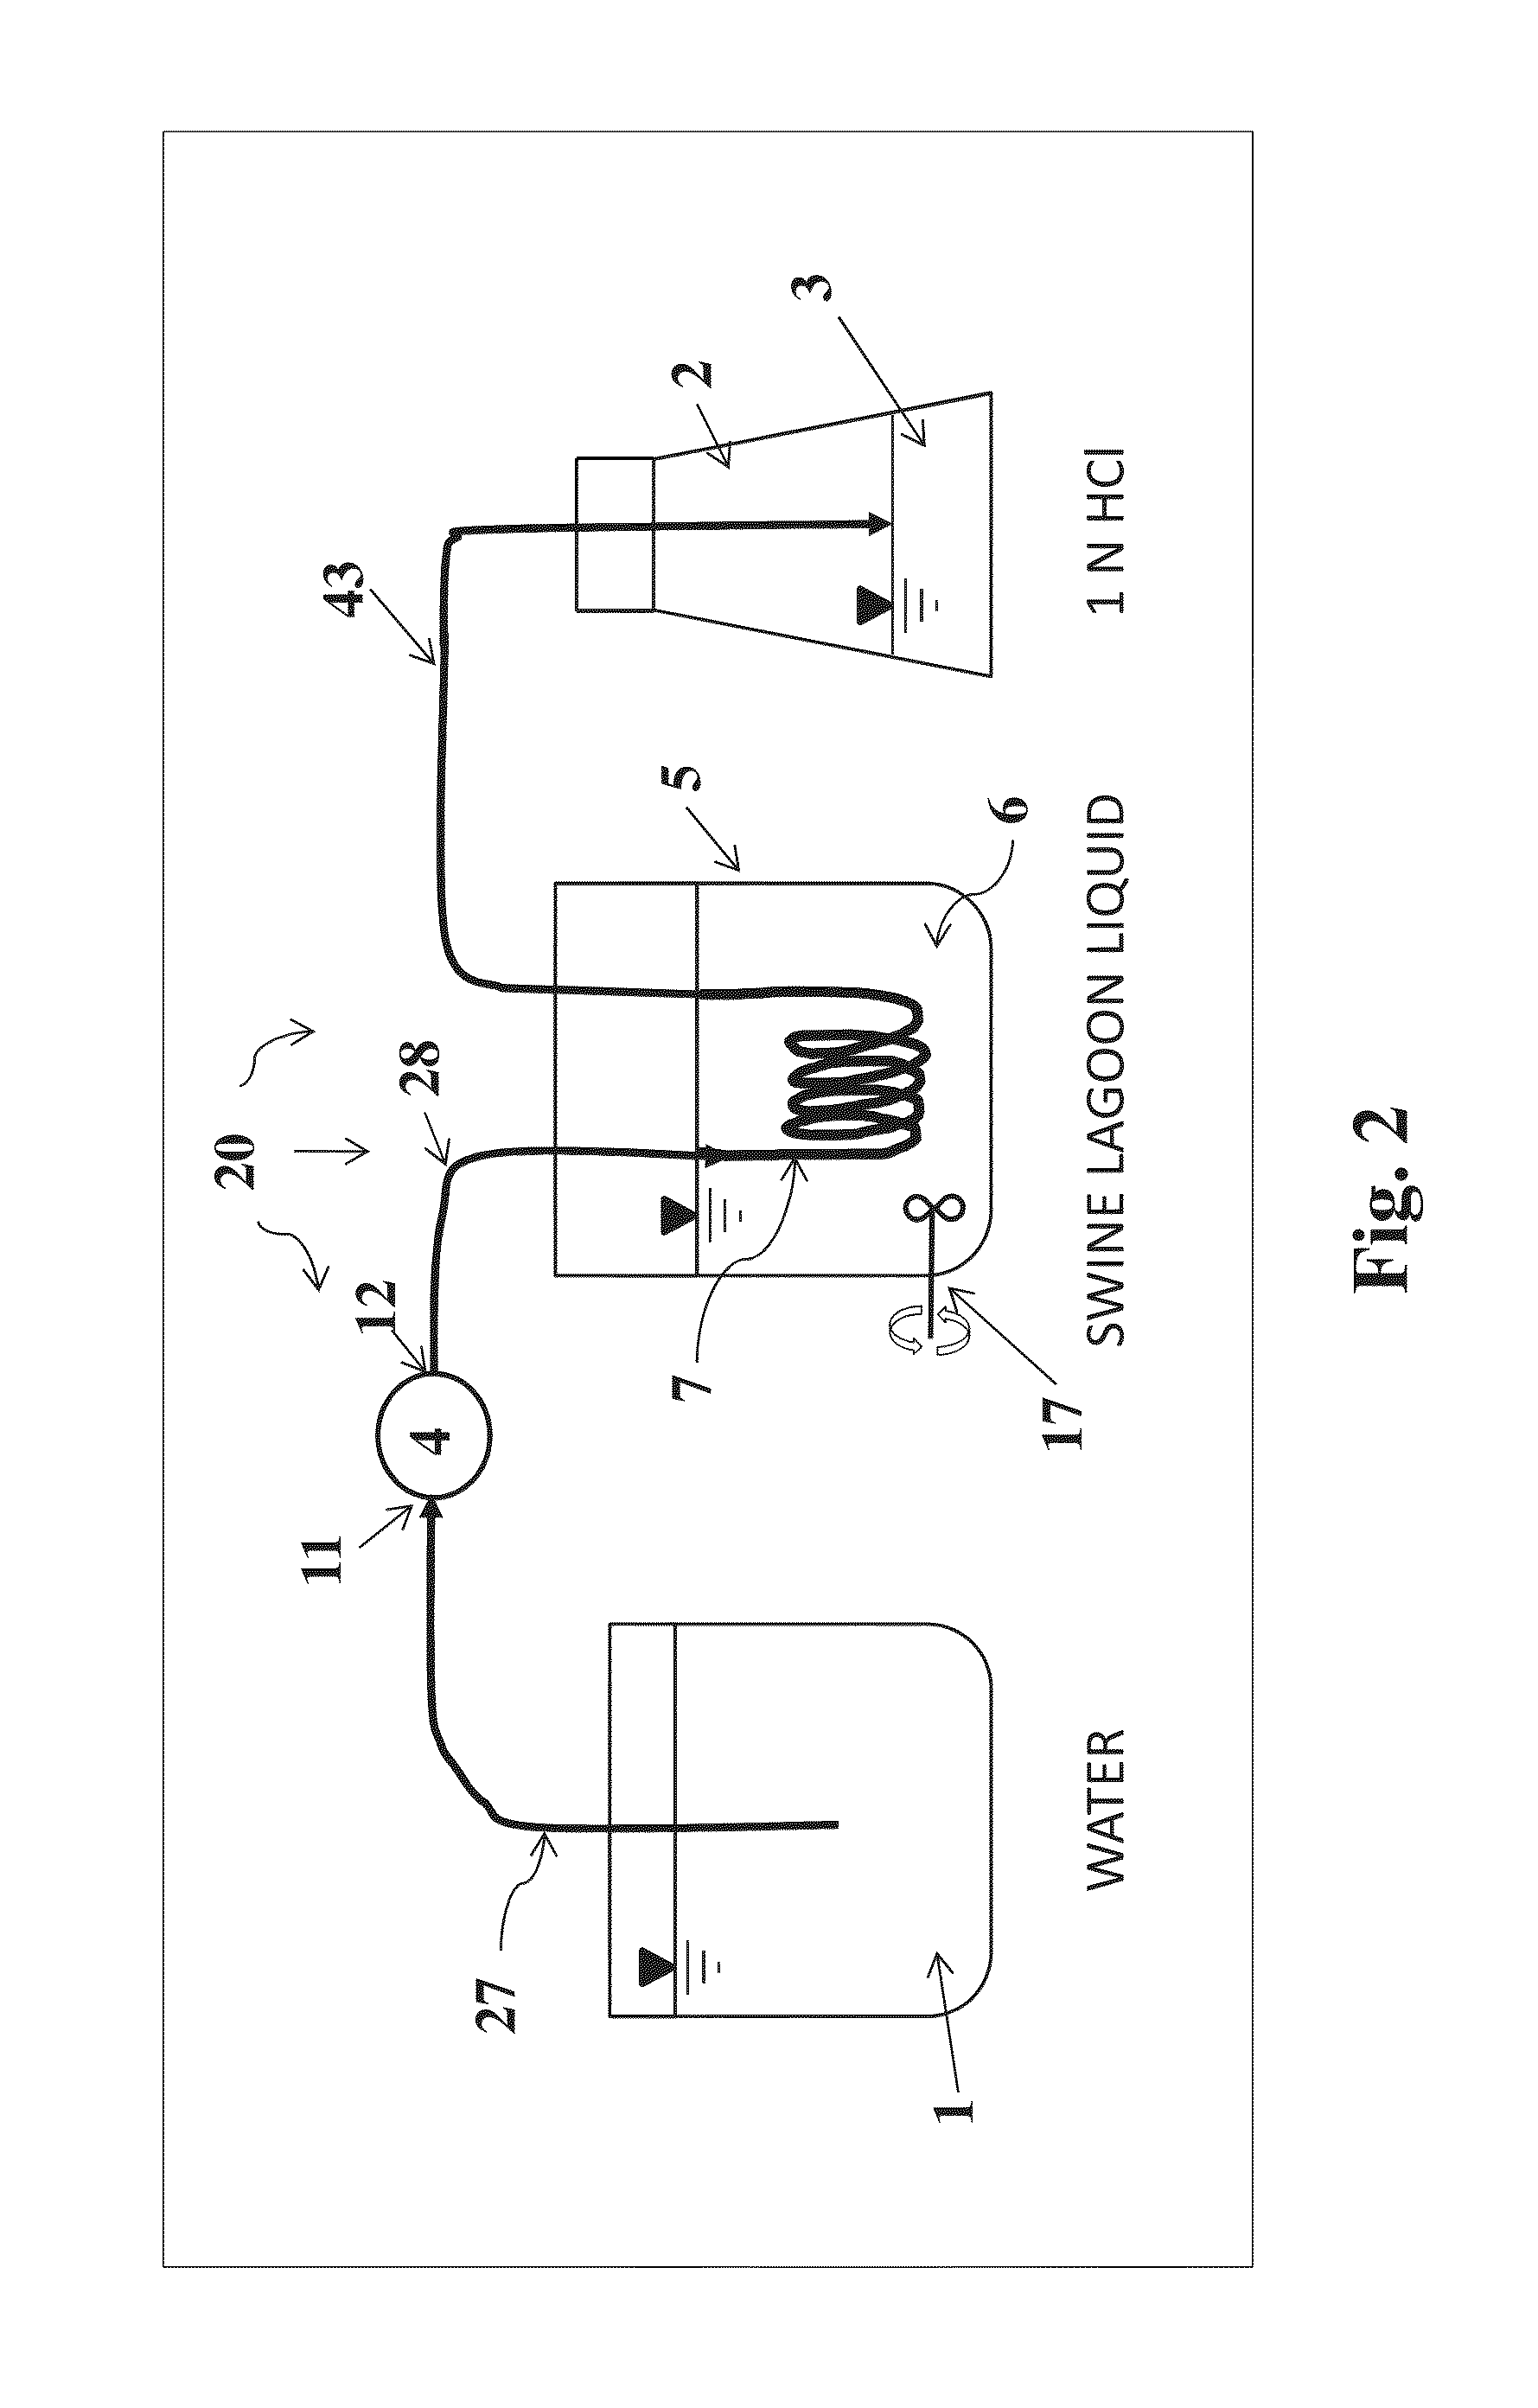 Systems and Methods for Reducing Ammonia Emissions from Liquid Effluents and for Recovering the Ammonia